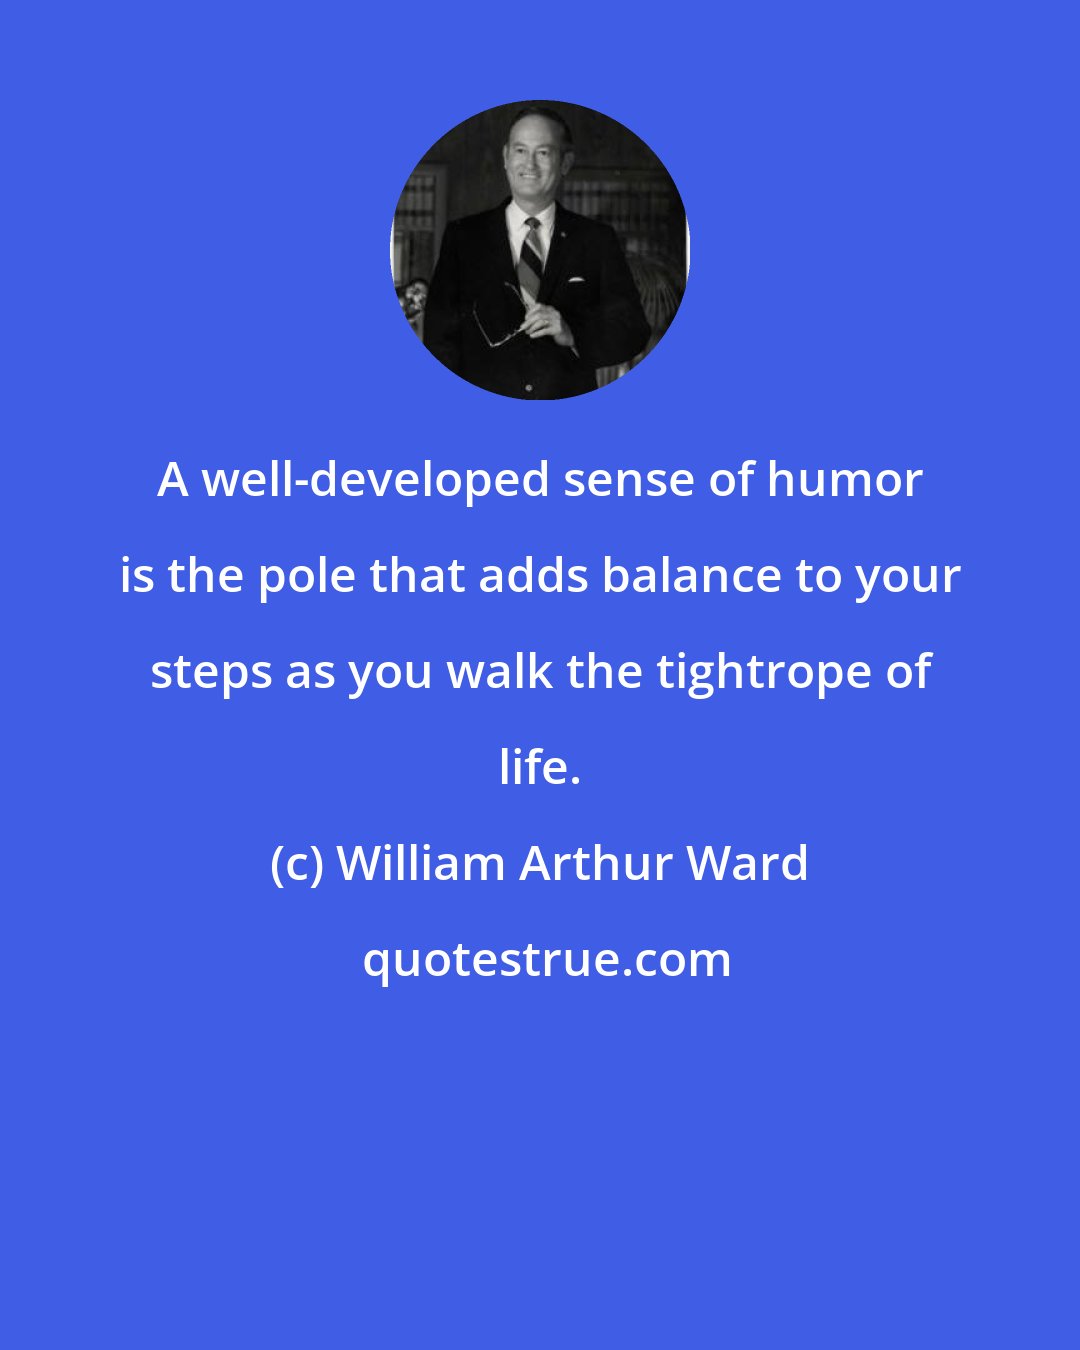 William Arthur Ward: A well-developed sense of humor is the pole that adds balance to your steps as you walk the tightrope of life.